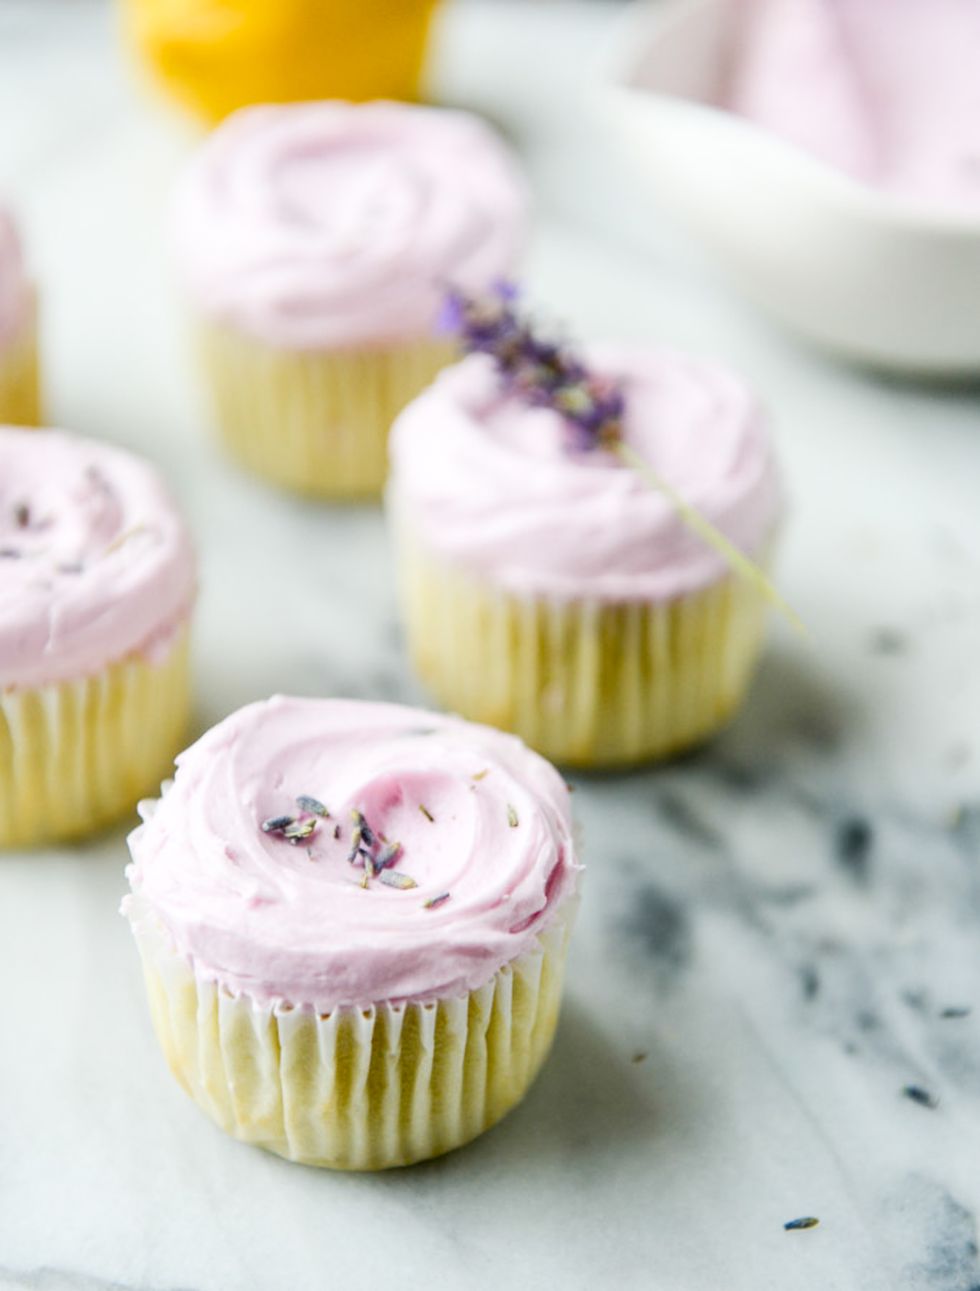 Lemon Cupcakes with Lavender Frosting Mix